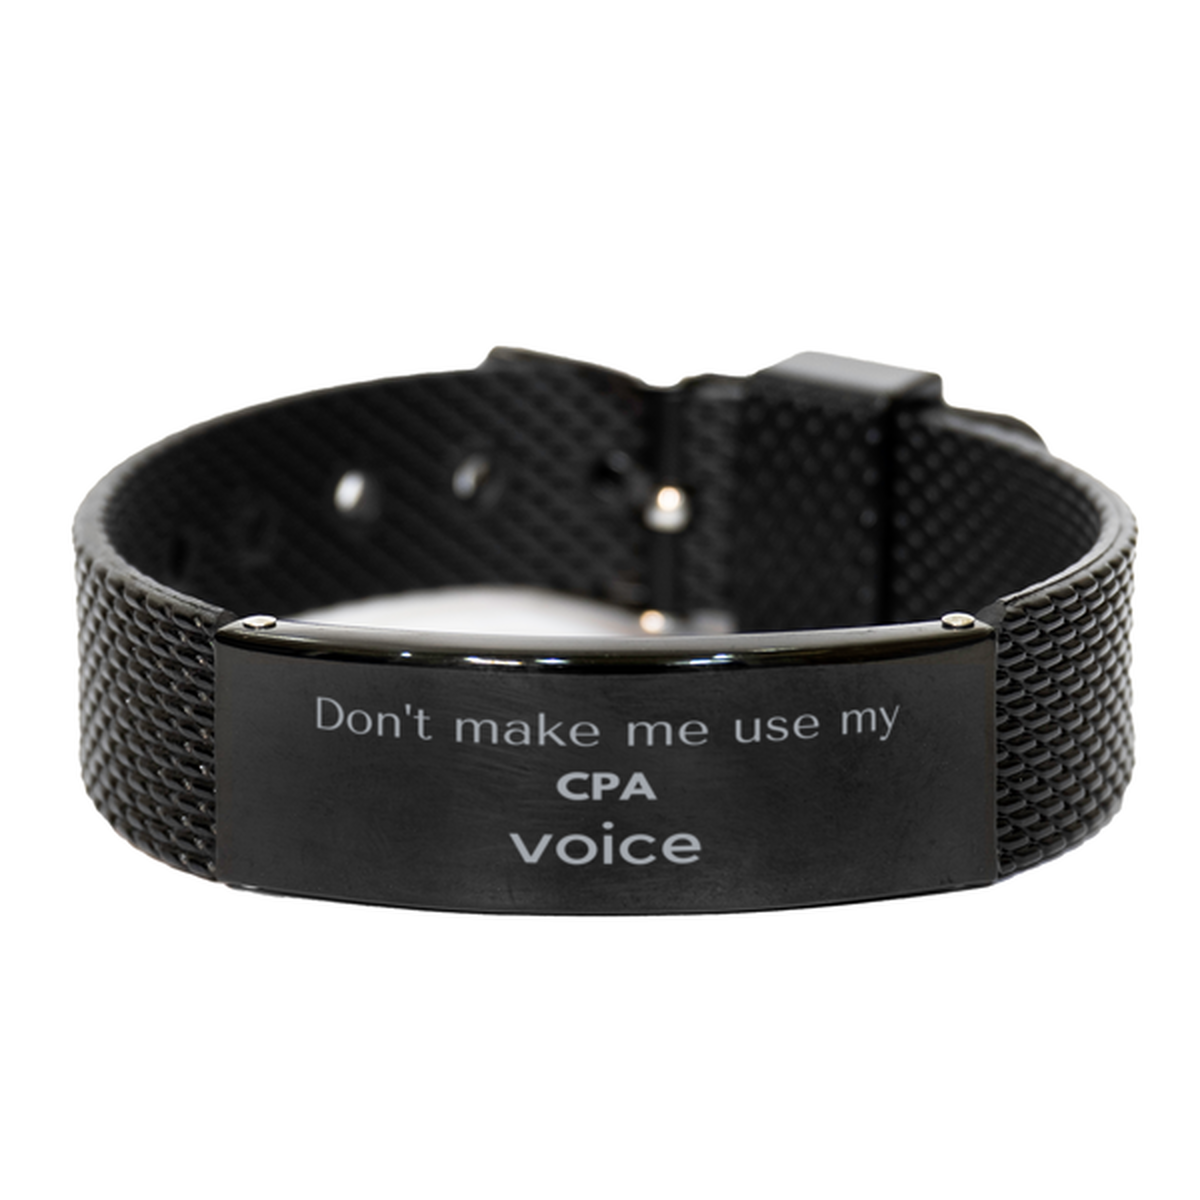 Don't make me use my CPA voice, Sarcasm CPA Gifts, Christmas CPA Black Shark Mesh Bracelet Birthday Unique Gifts For CPA Coworkers, Men, Women, Colleague, Friends